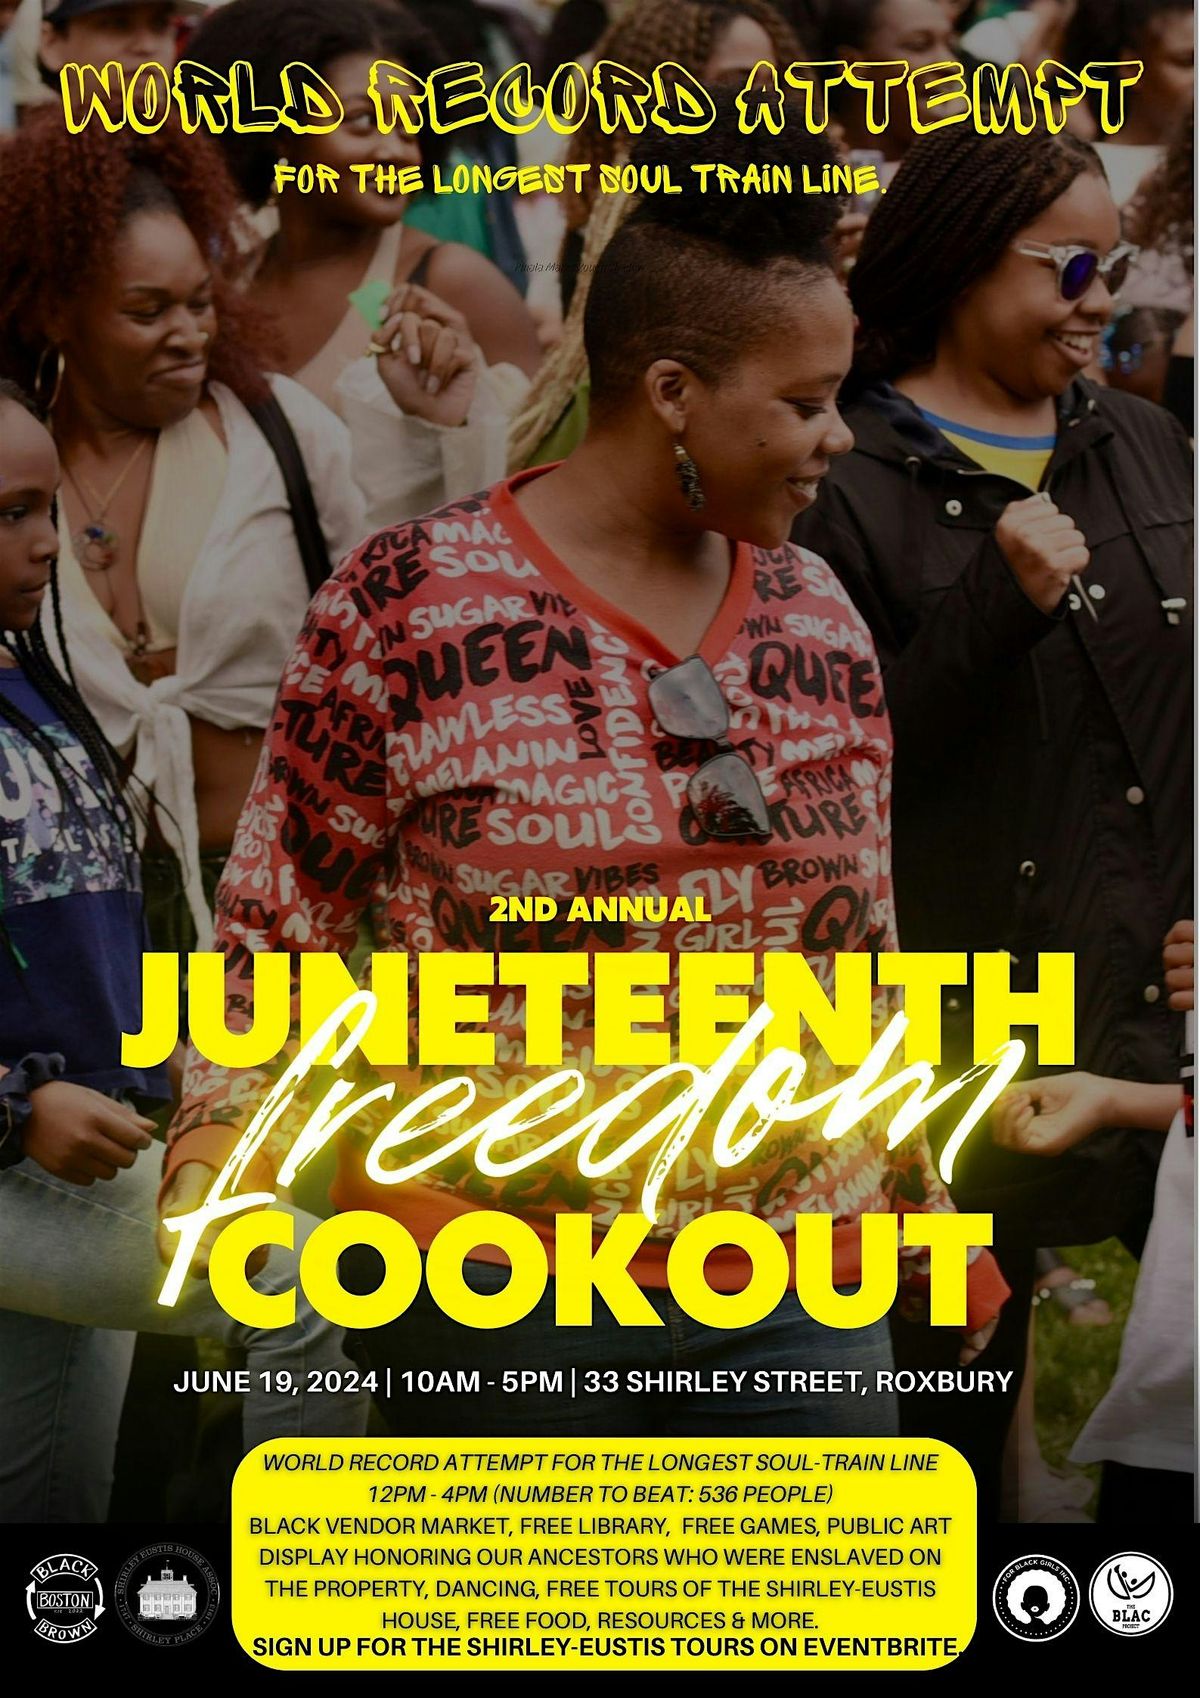 The 2nd Annual Juneteenth Freedom Cookout